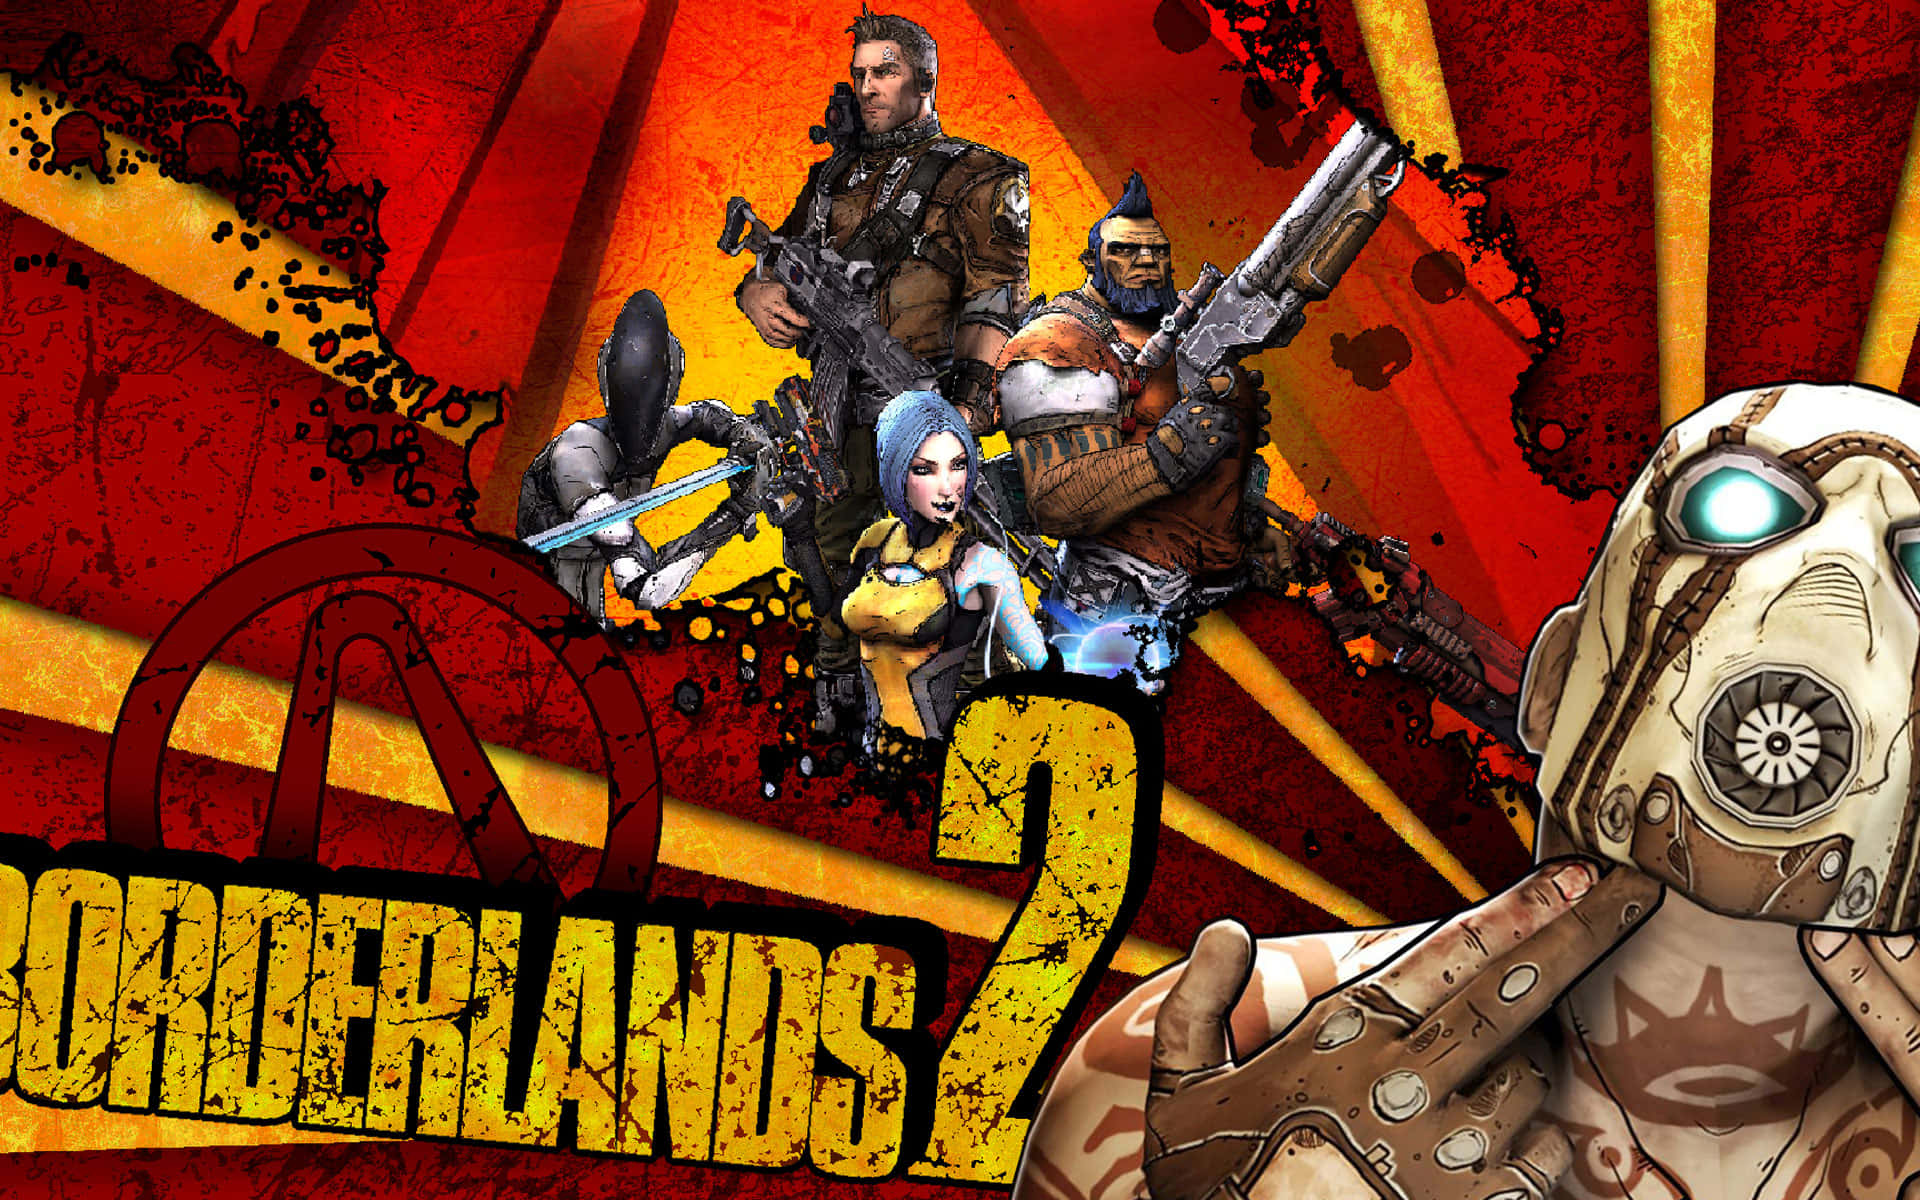 Intriguing Borderlands Wallpaper with Unique Characters